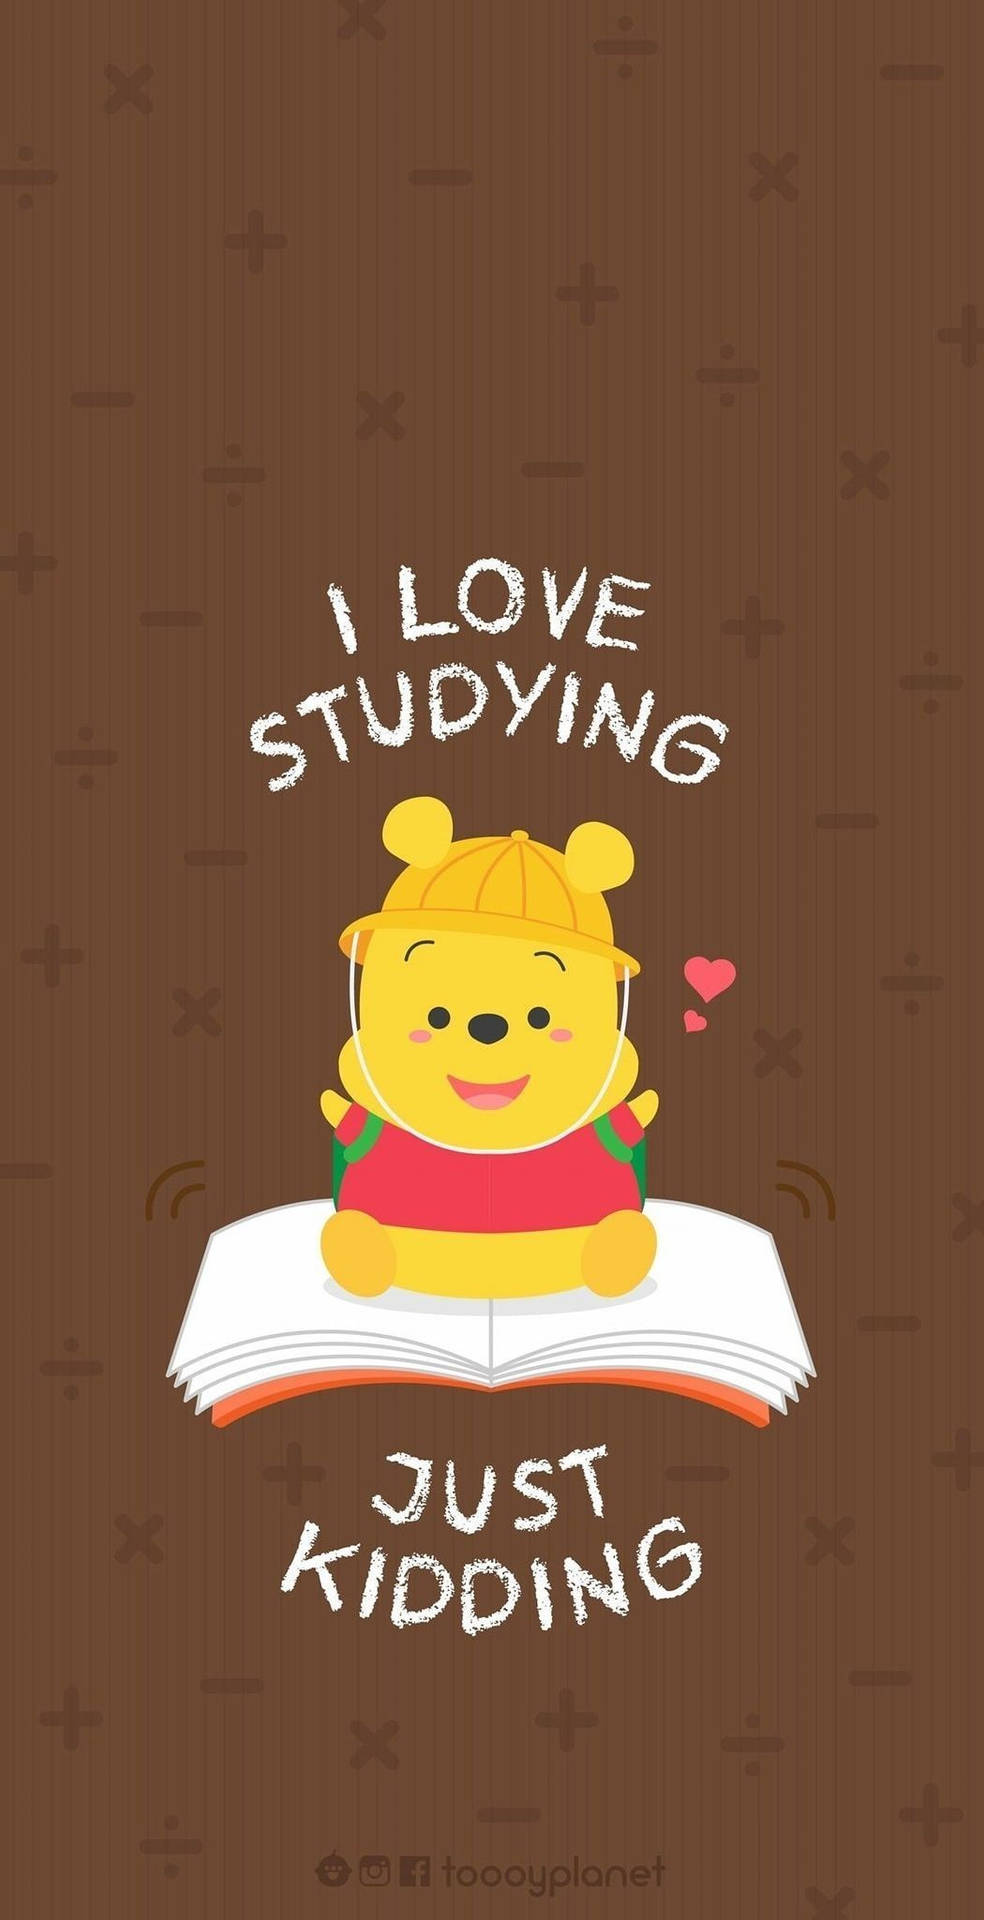 Cute Winnie The Pooh Iphone Love Studying Kidding Wallpaper